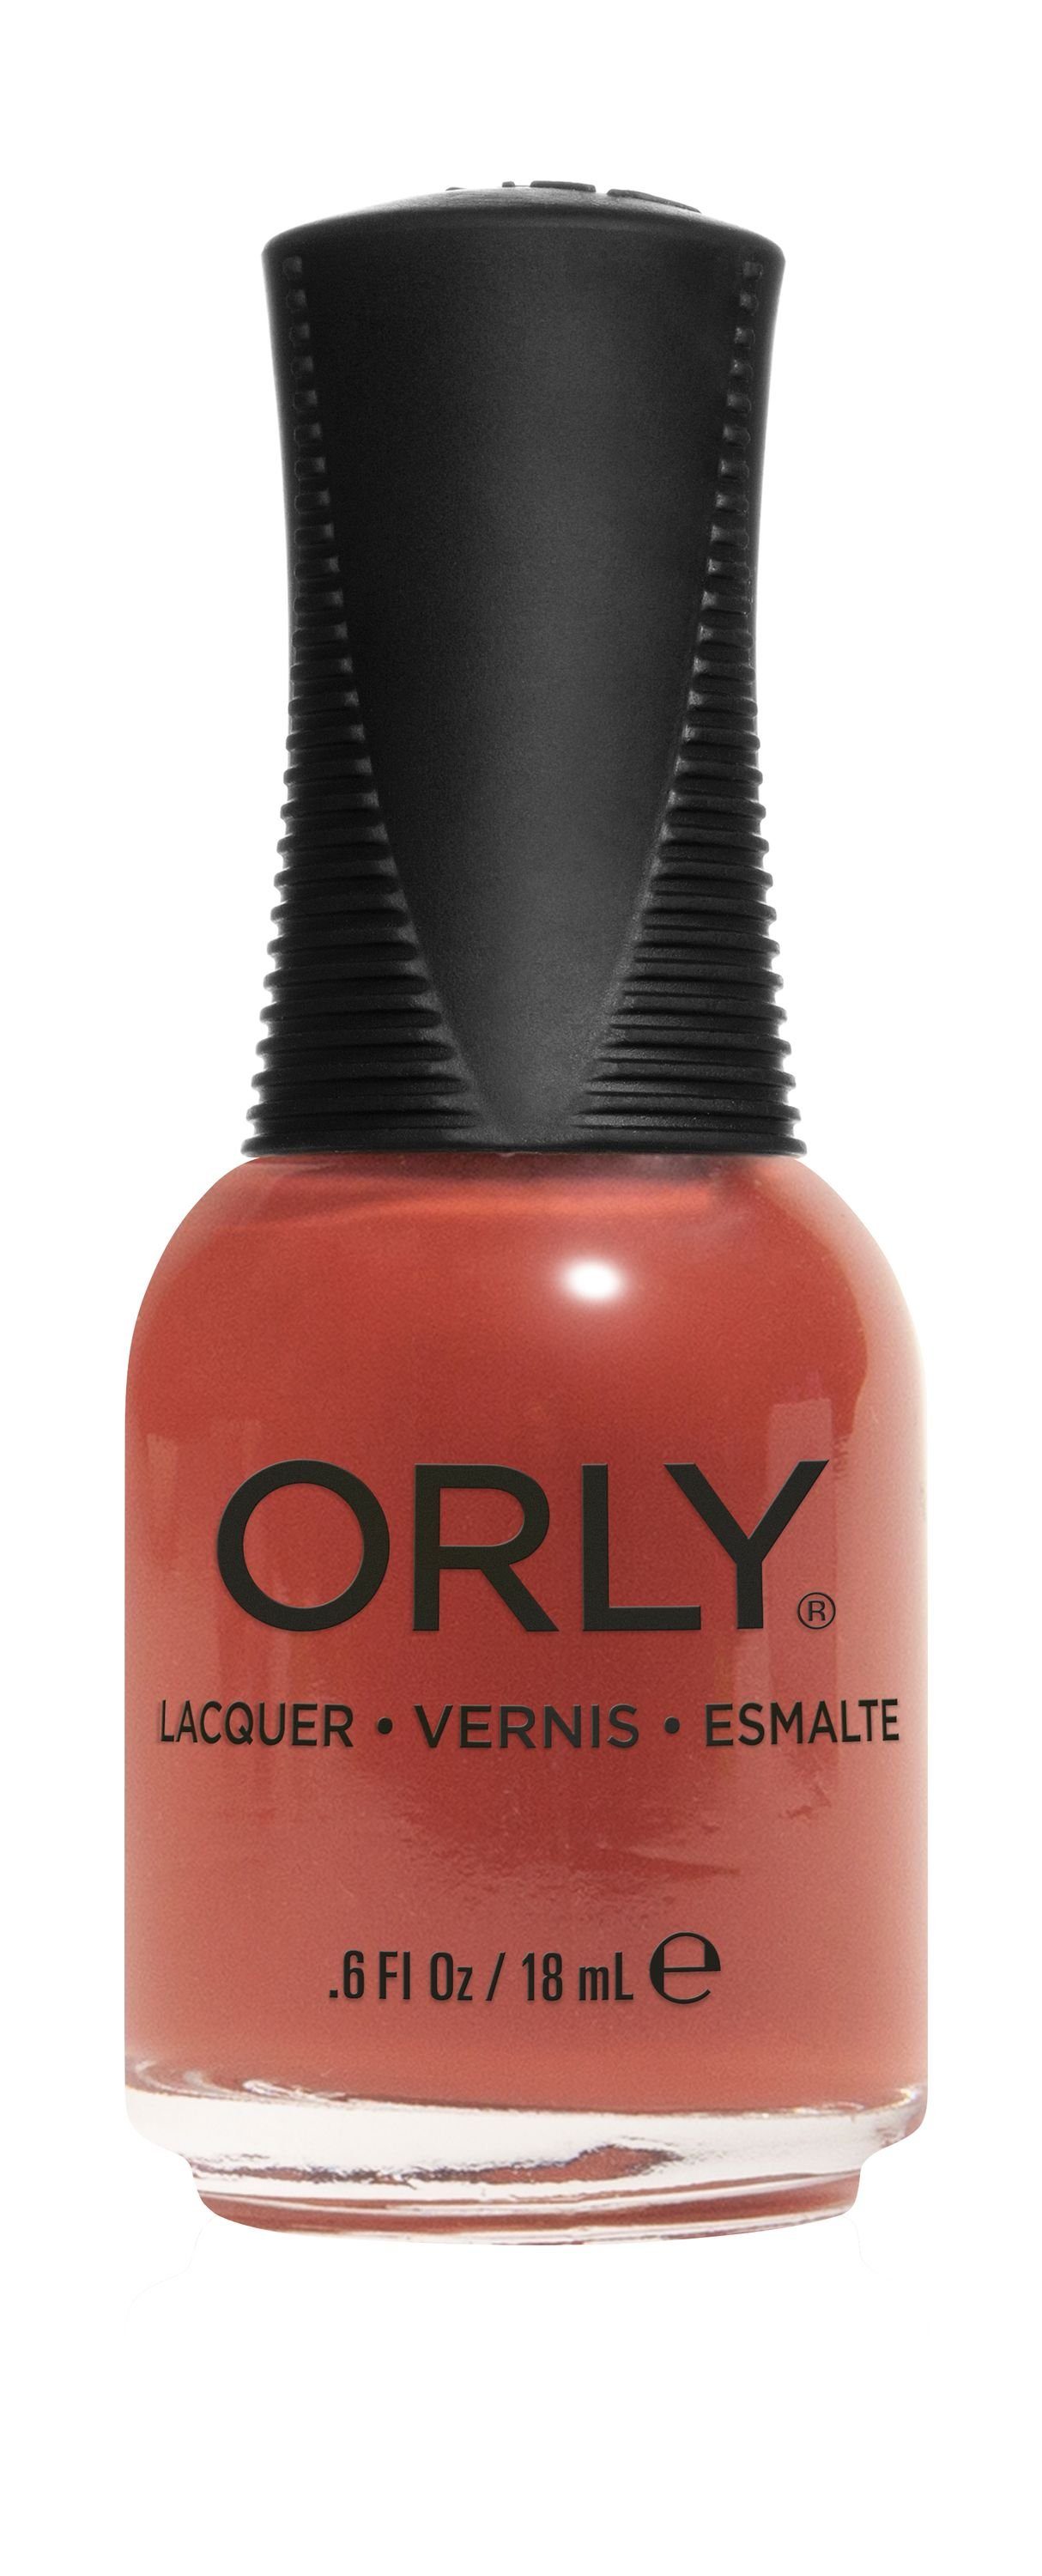 ORLY The - ORLY Groove, Nagellack Nagellack In 18ML